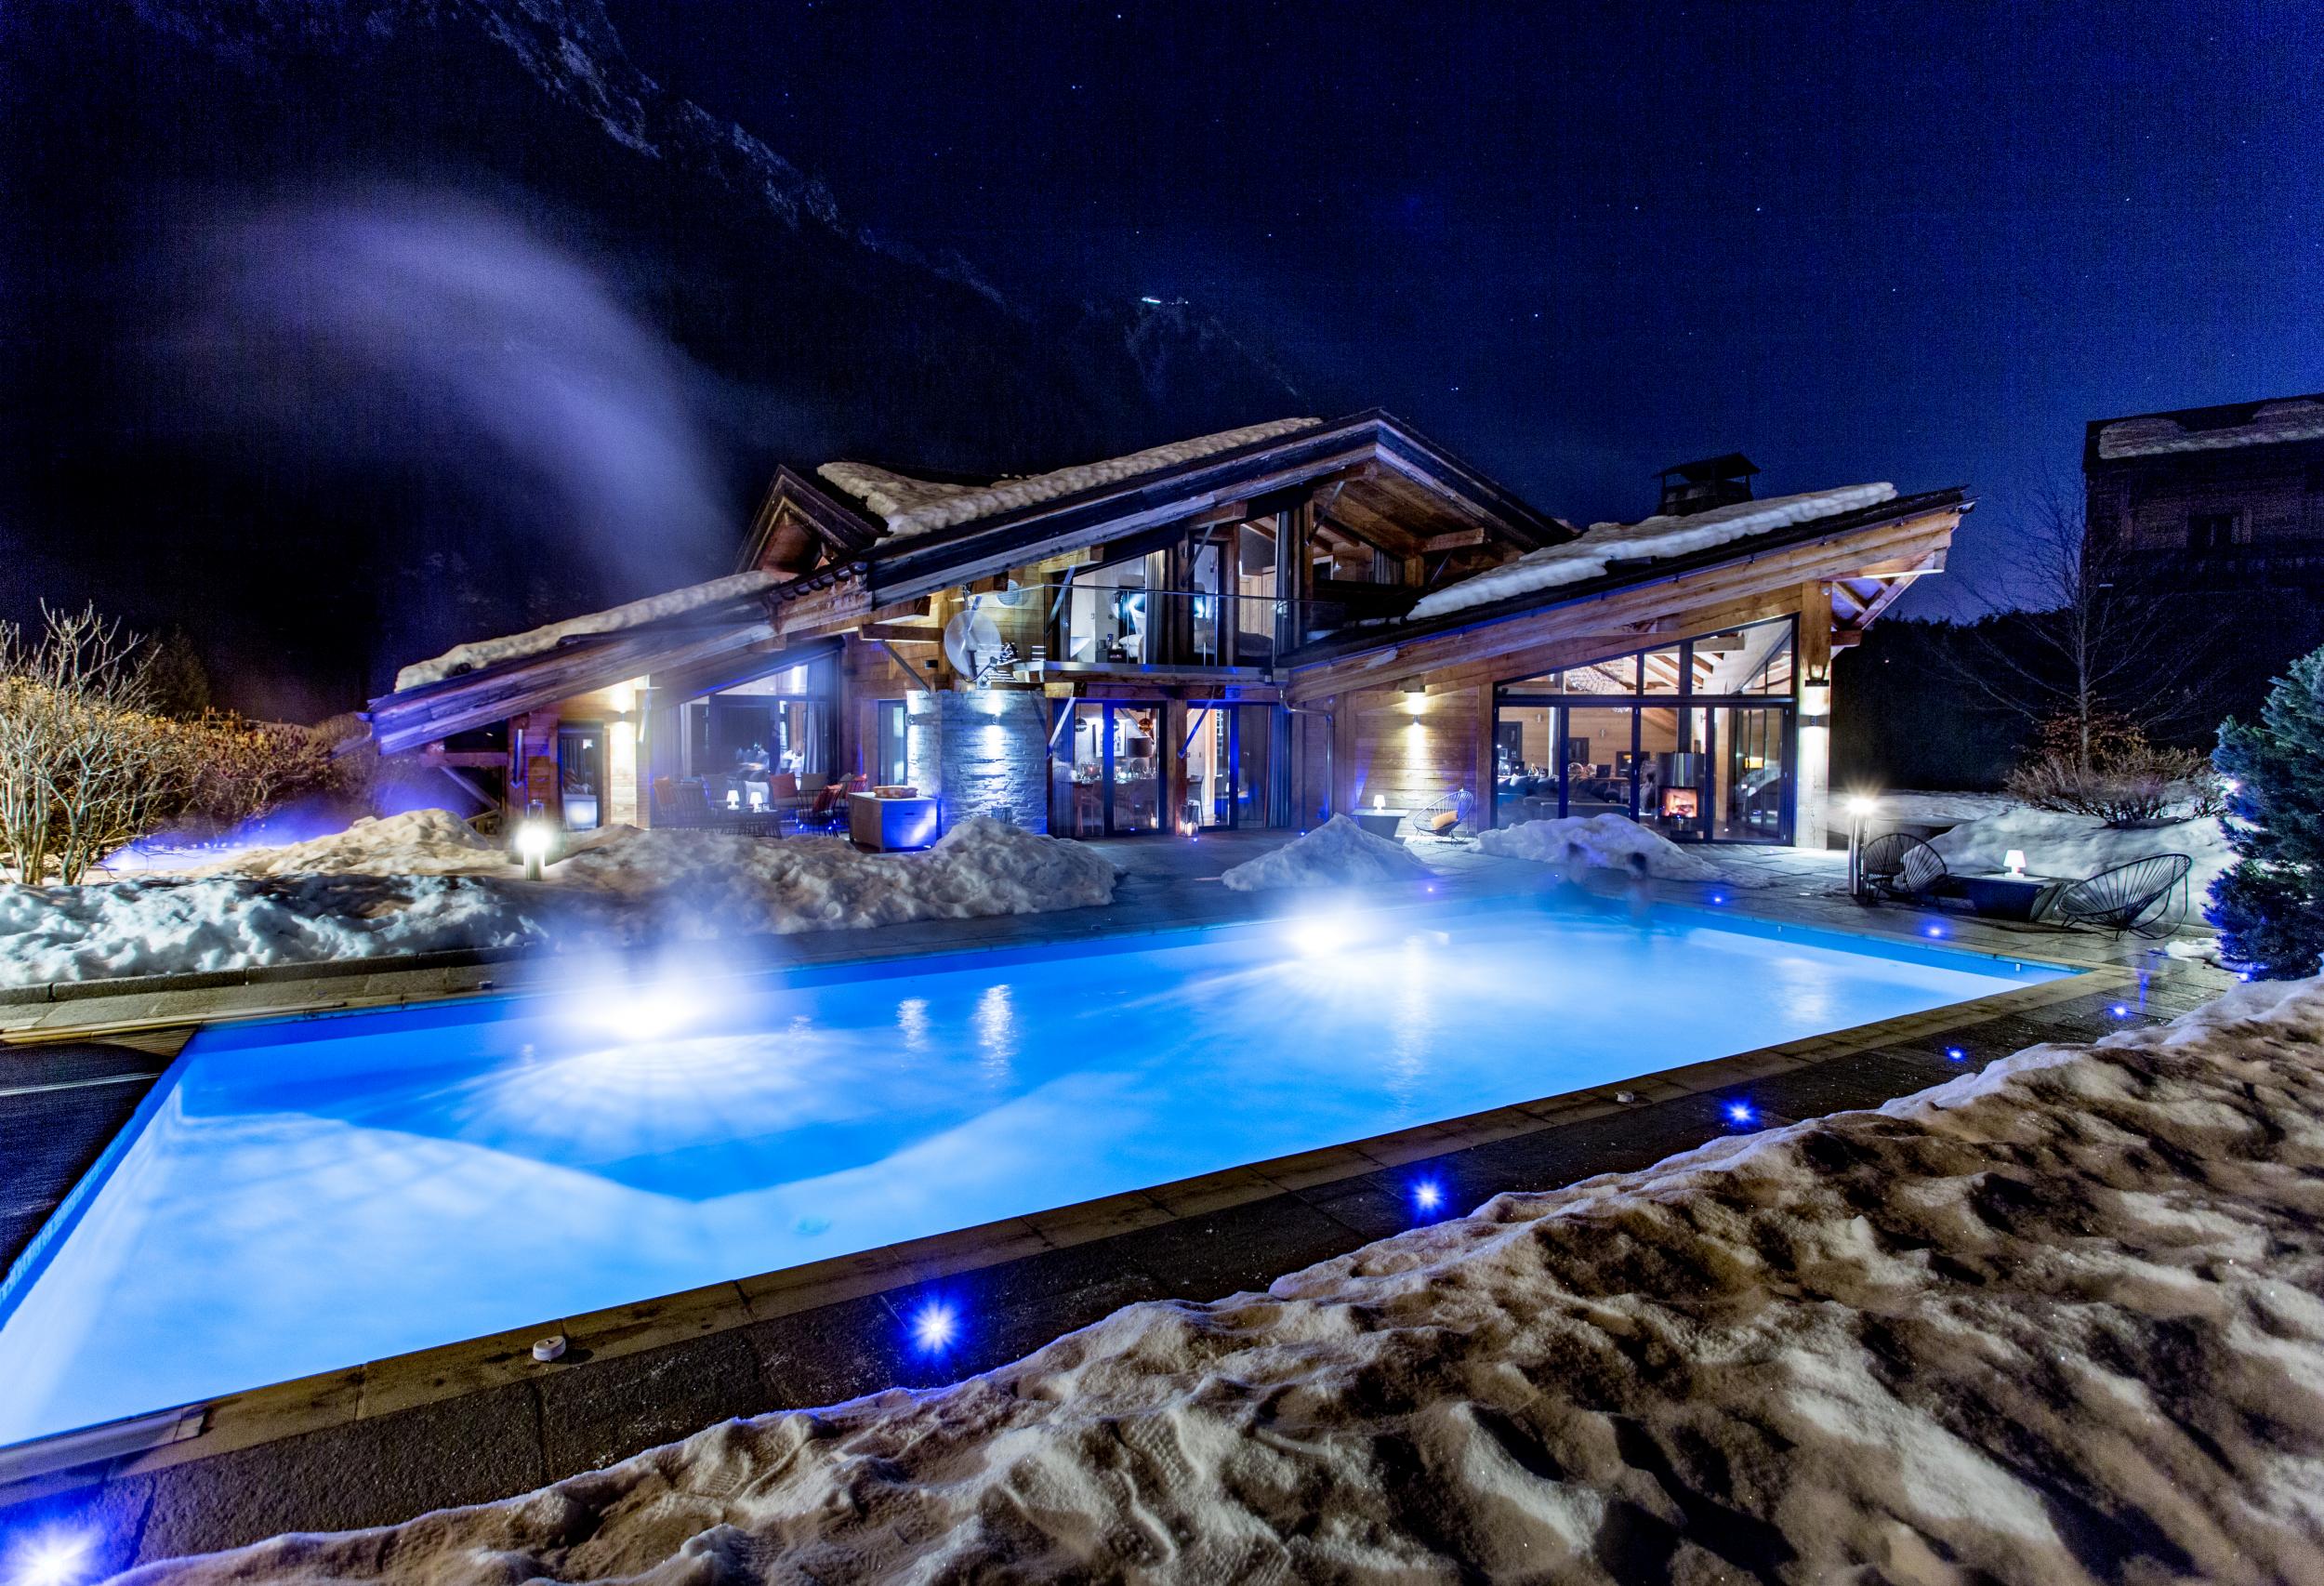 The outdoor pool at Chalet Couttet